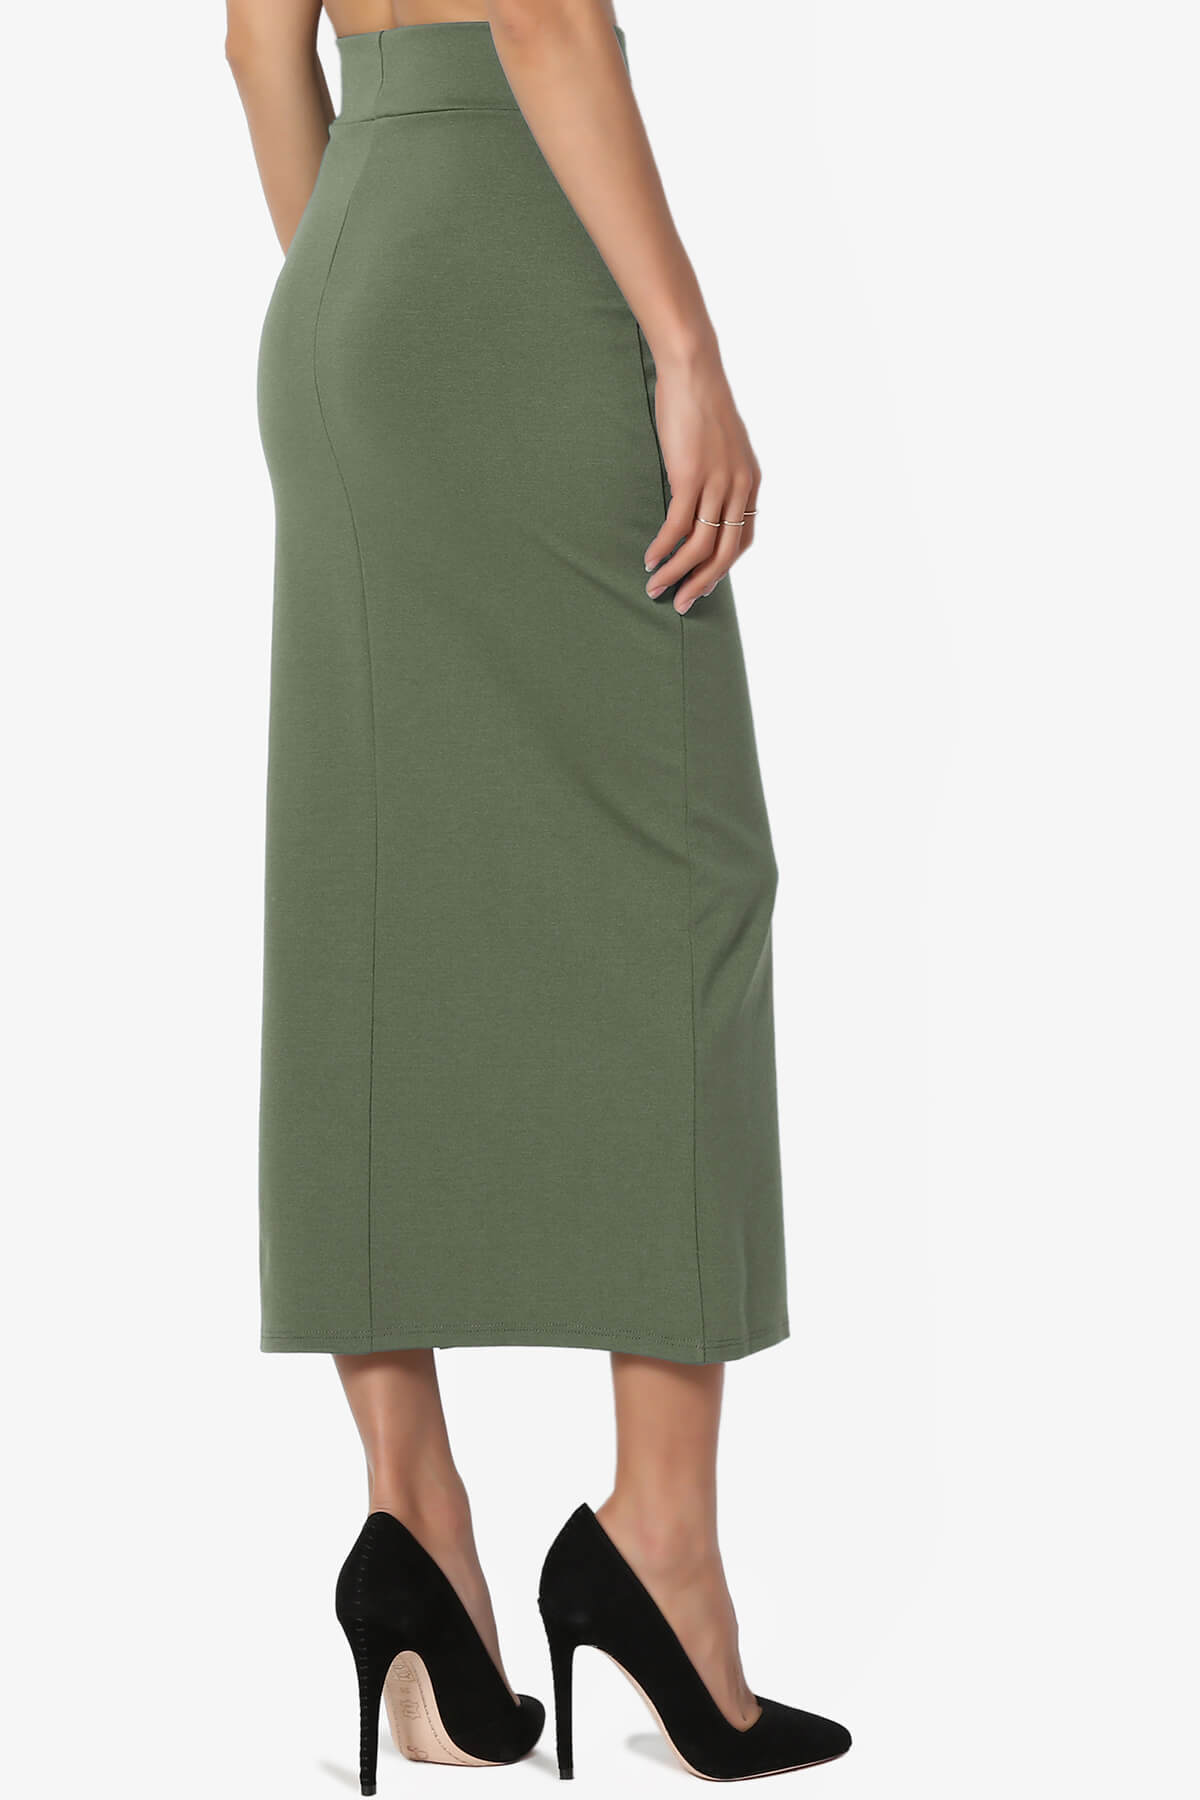 Load image into Gallery viewer, Carleta Mid Calf Pencil Skirt DUSTY OLIVE_4
